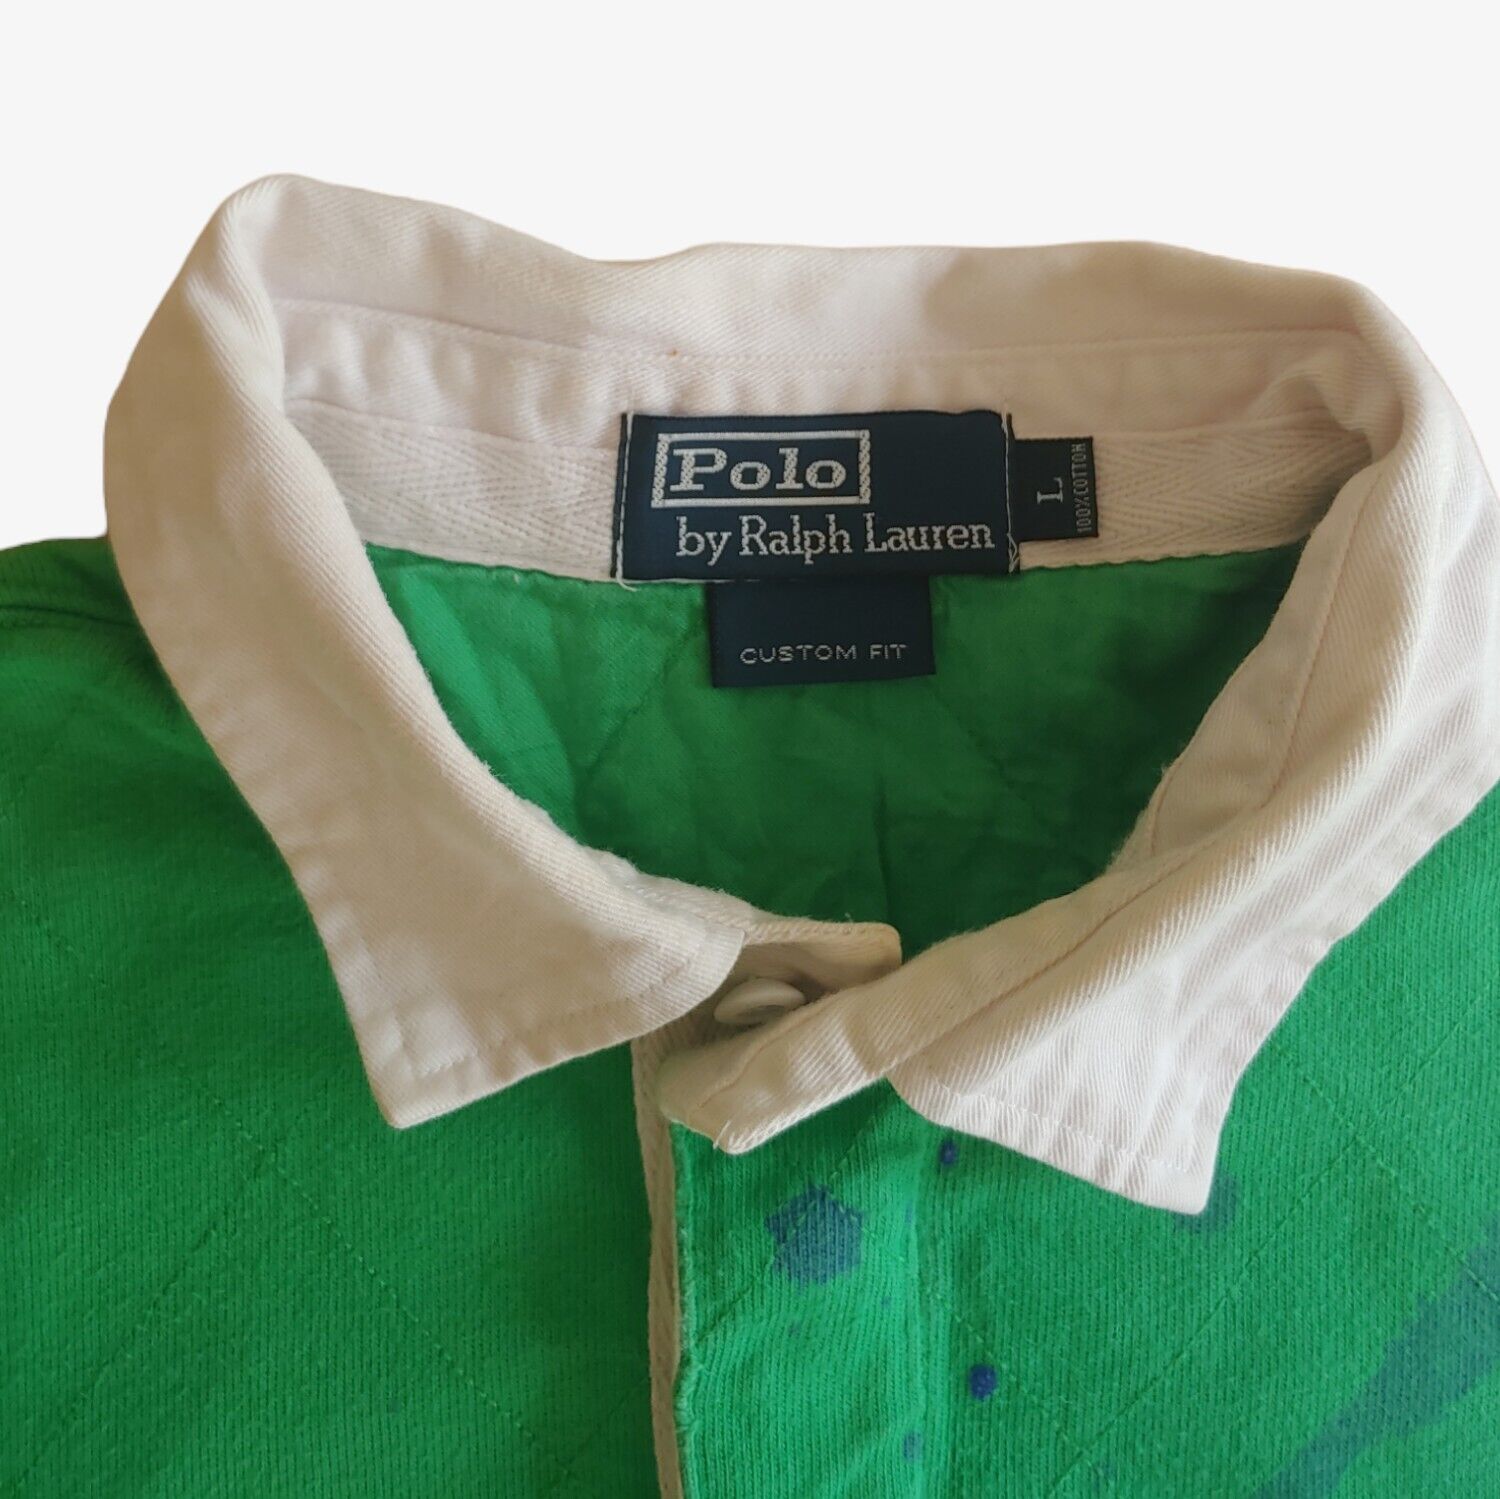 Vintage 90s Polo Ralph Lauren Green Long Sleeve Rugby Shirt With Big Spell Out Polo Player Logo Graphic Print Label - Casspios Dream